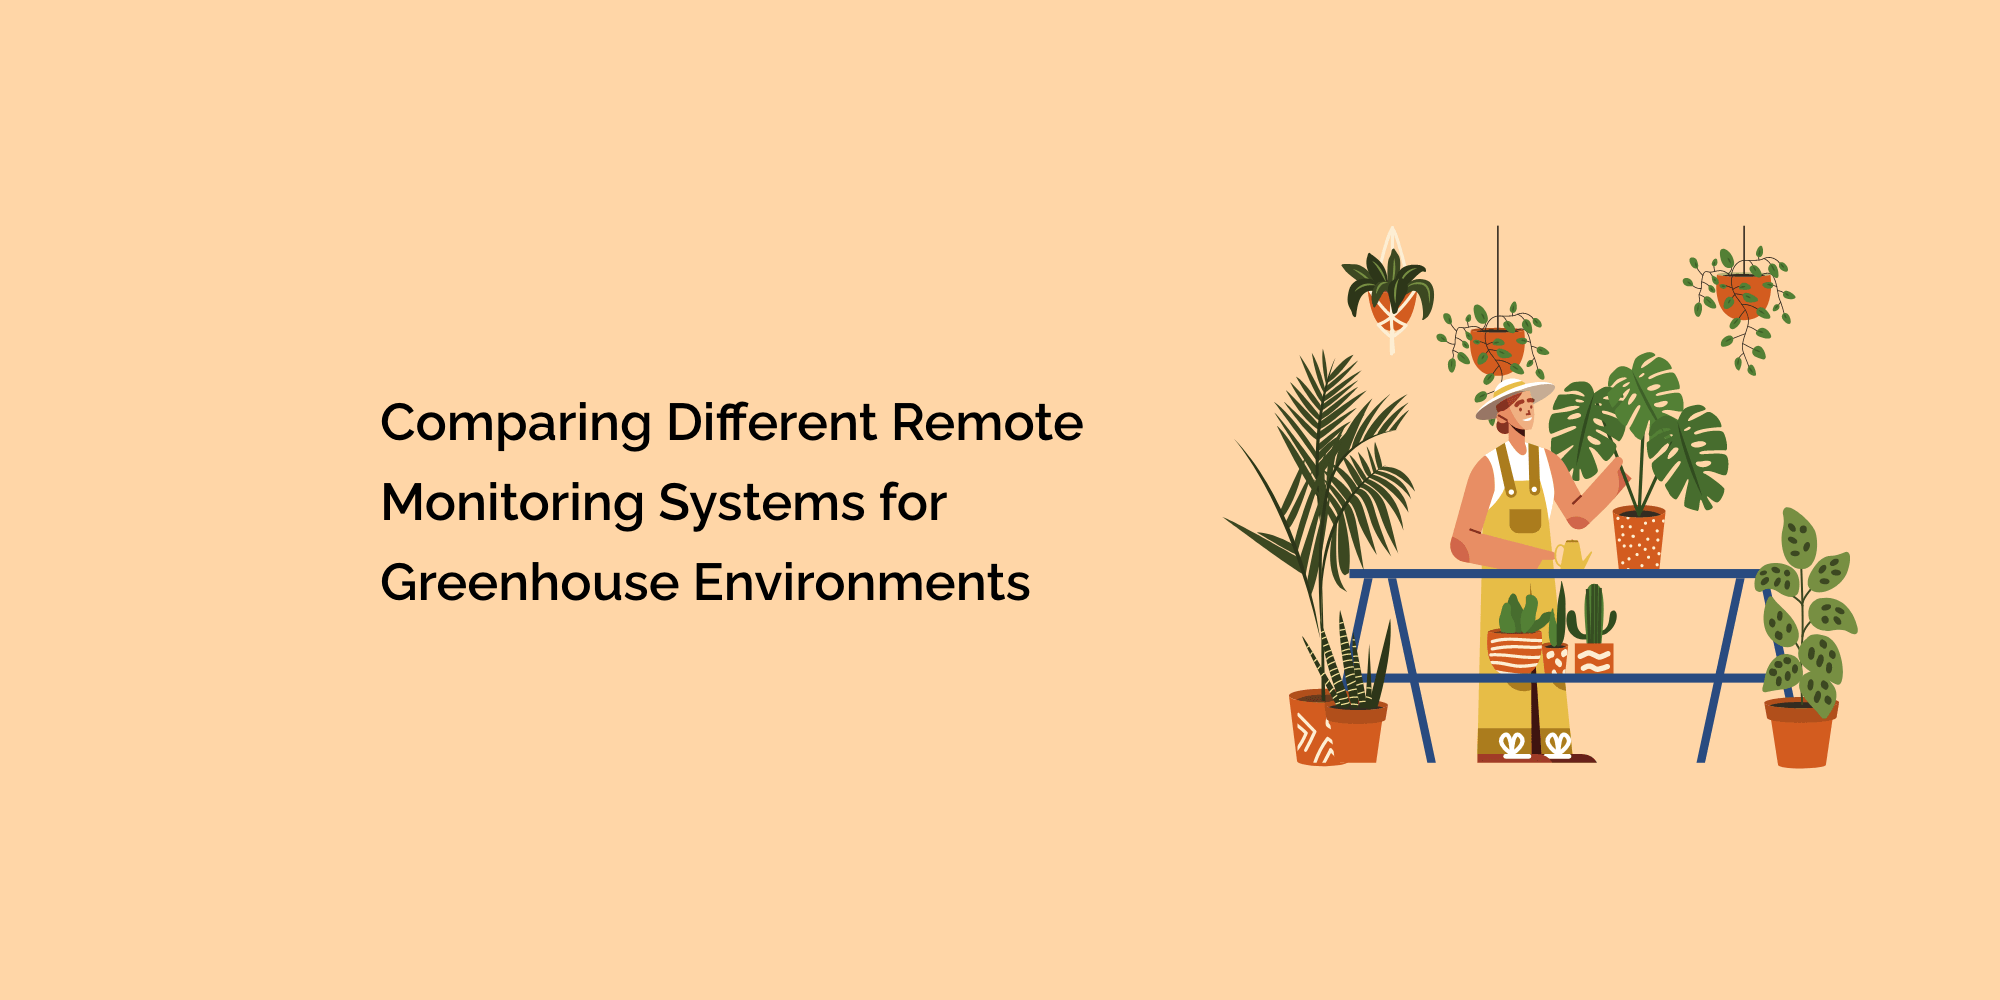 Comparing Different Remote Monitoring Systems for Greenhouse Environments